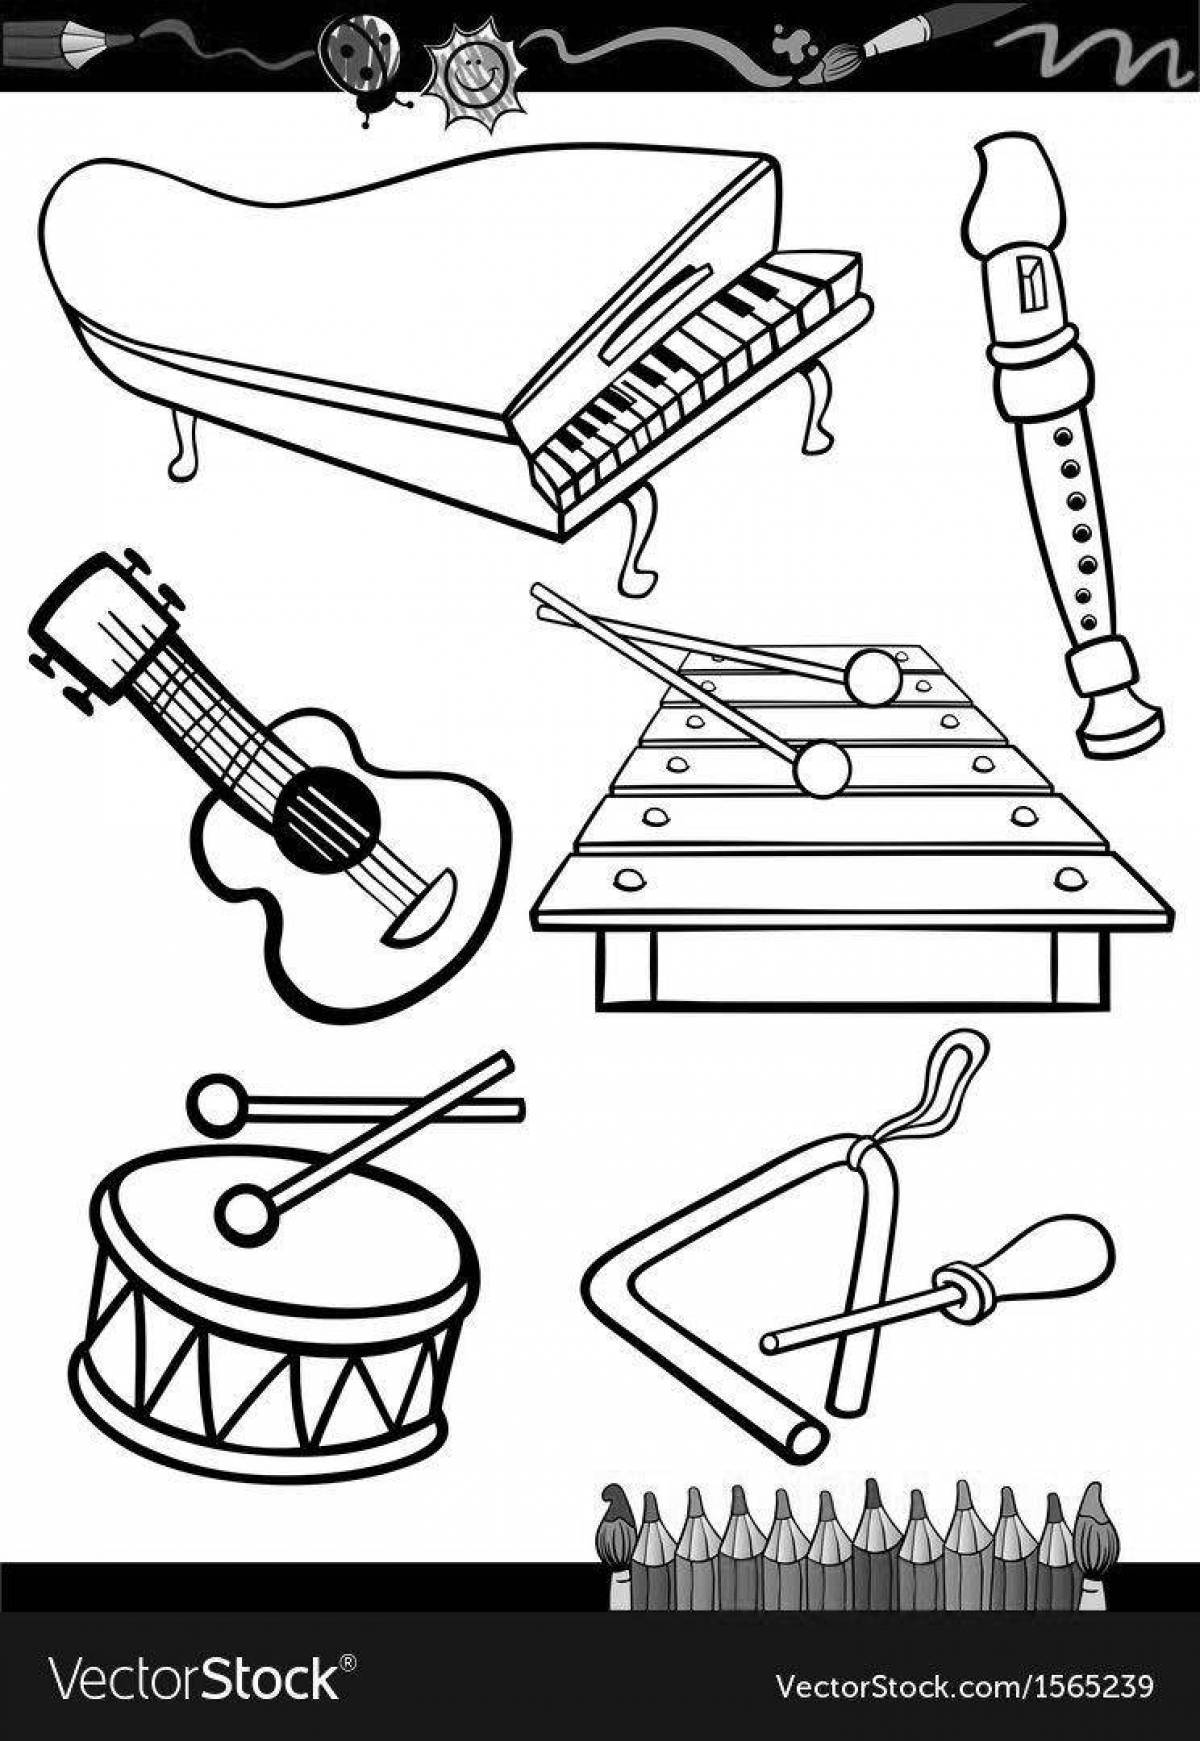 Large musical instruments coloring book